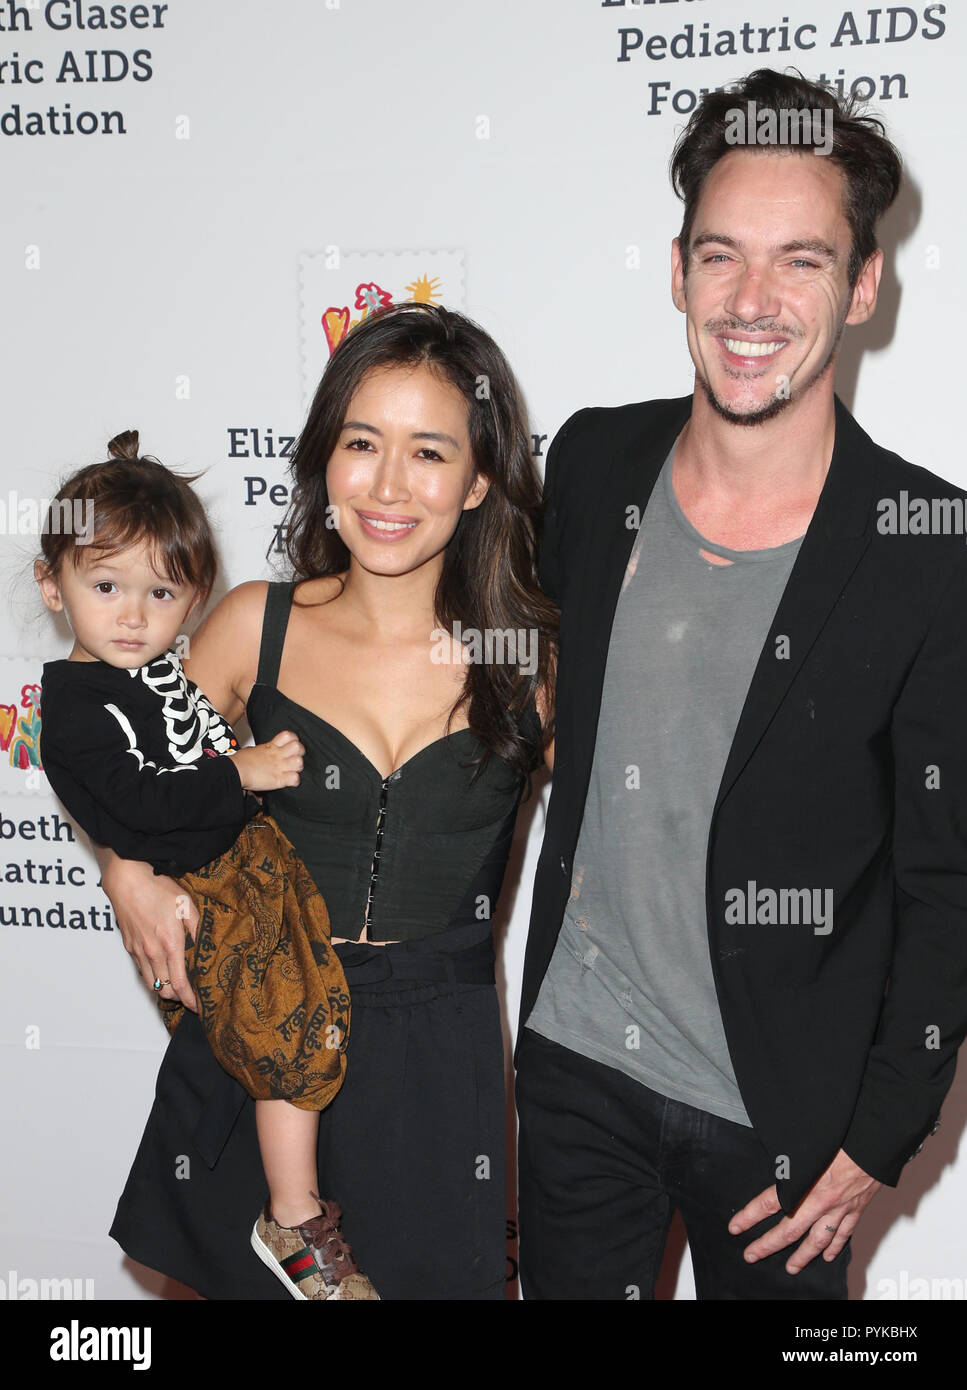 Culver City, Ca. 28th Oct, 2018. Jonathan Rhys Meyers, Mara Lane, Toco Lane Rhys Meyers, at the Elizabeth Glaser Pediatric AIDS Foundation 30th Anniversary at A Time for Heroes Family Festival at Smashbox Studios in Culver City, California on October 28, 2018. Credit: Faye Sadou/Media Punch/Alamy Live News Stock Photo